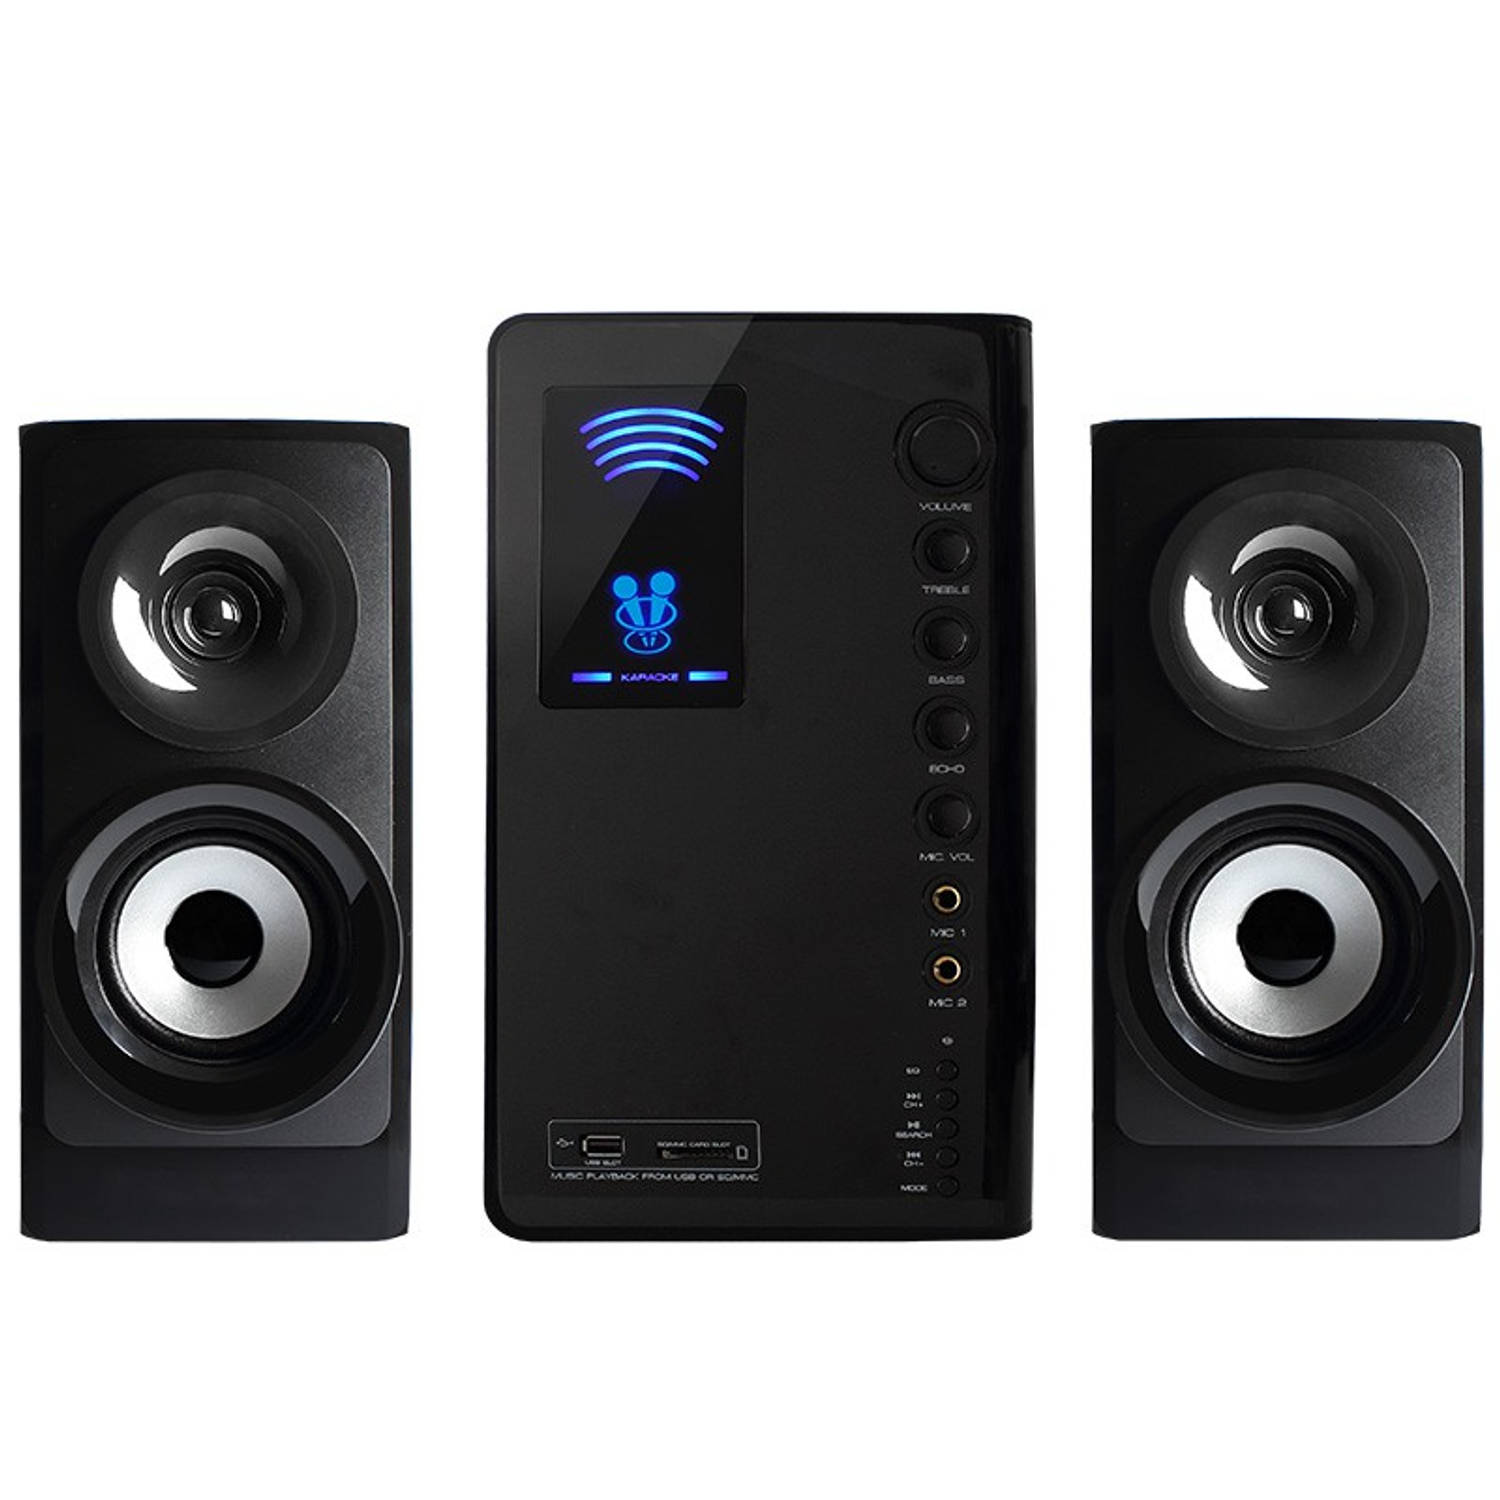 Tracer traglo46520- Tumba- bluetooth speakers- tracer 2.1